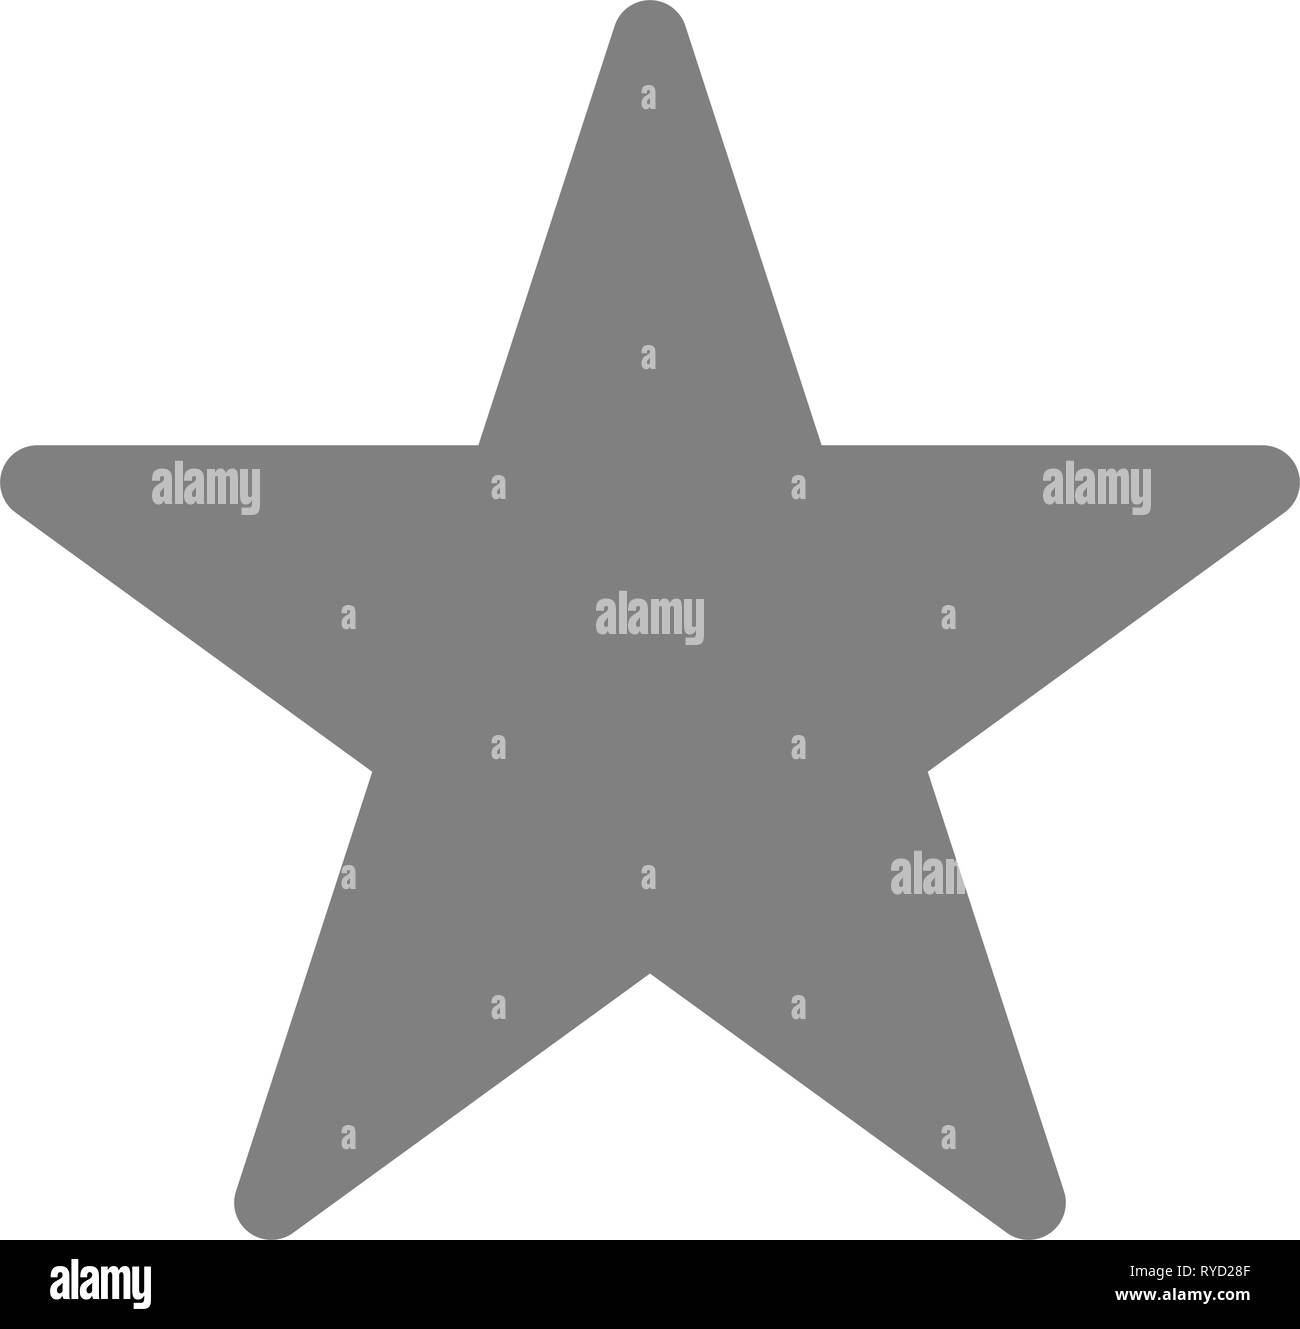 Star symbol icon - gray simple, 5 pointed rounded, isolated - vector illustration Stock Vector